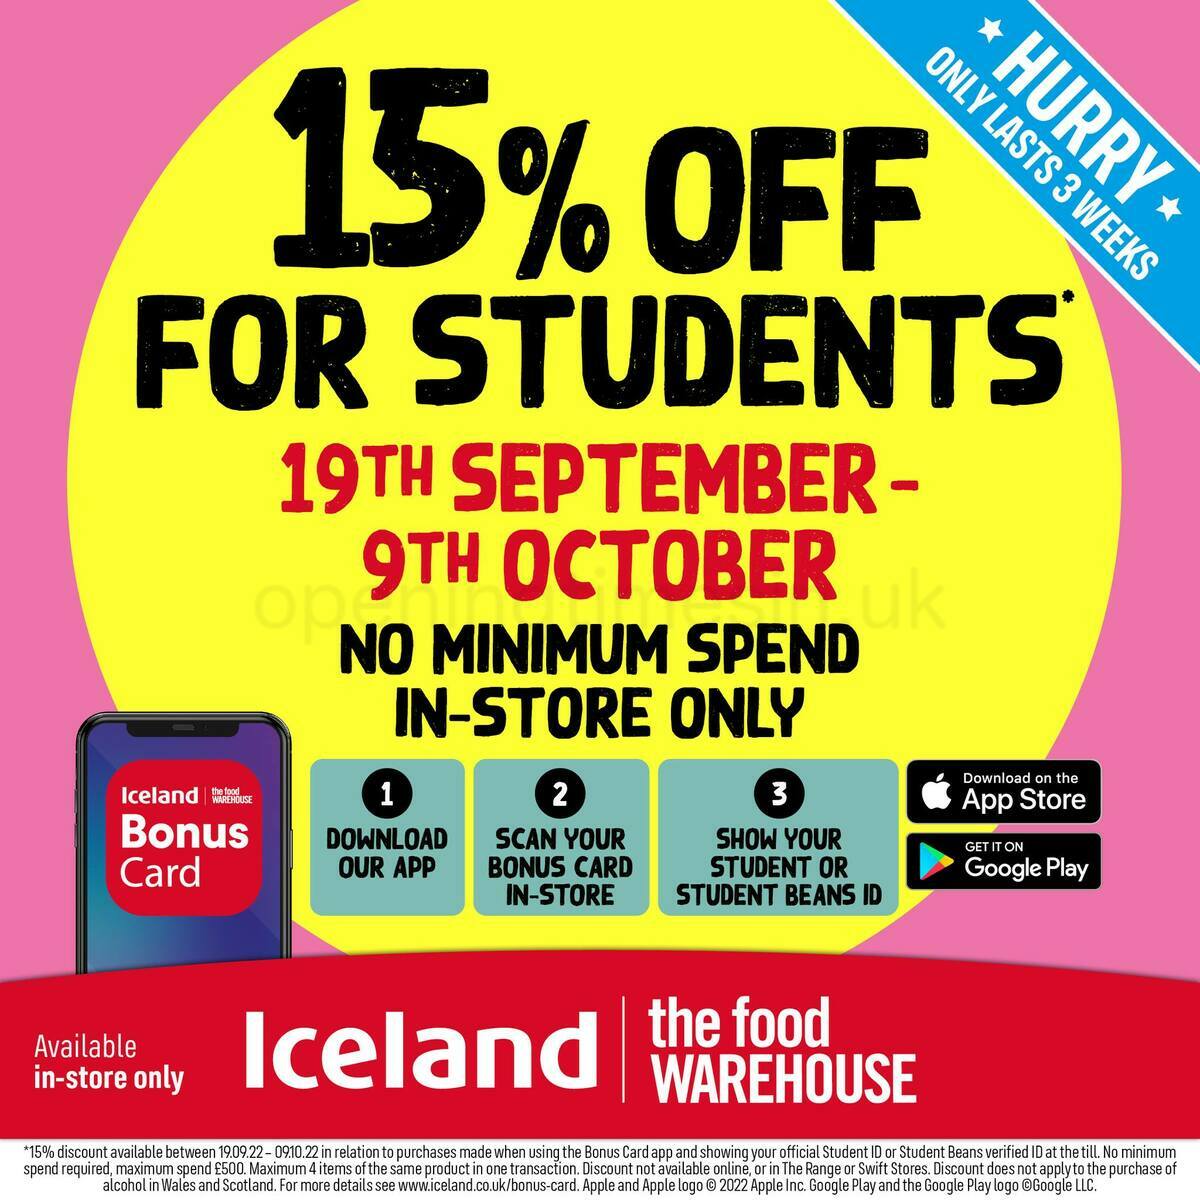 Iceland Offers from 29 September